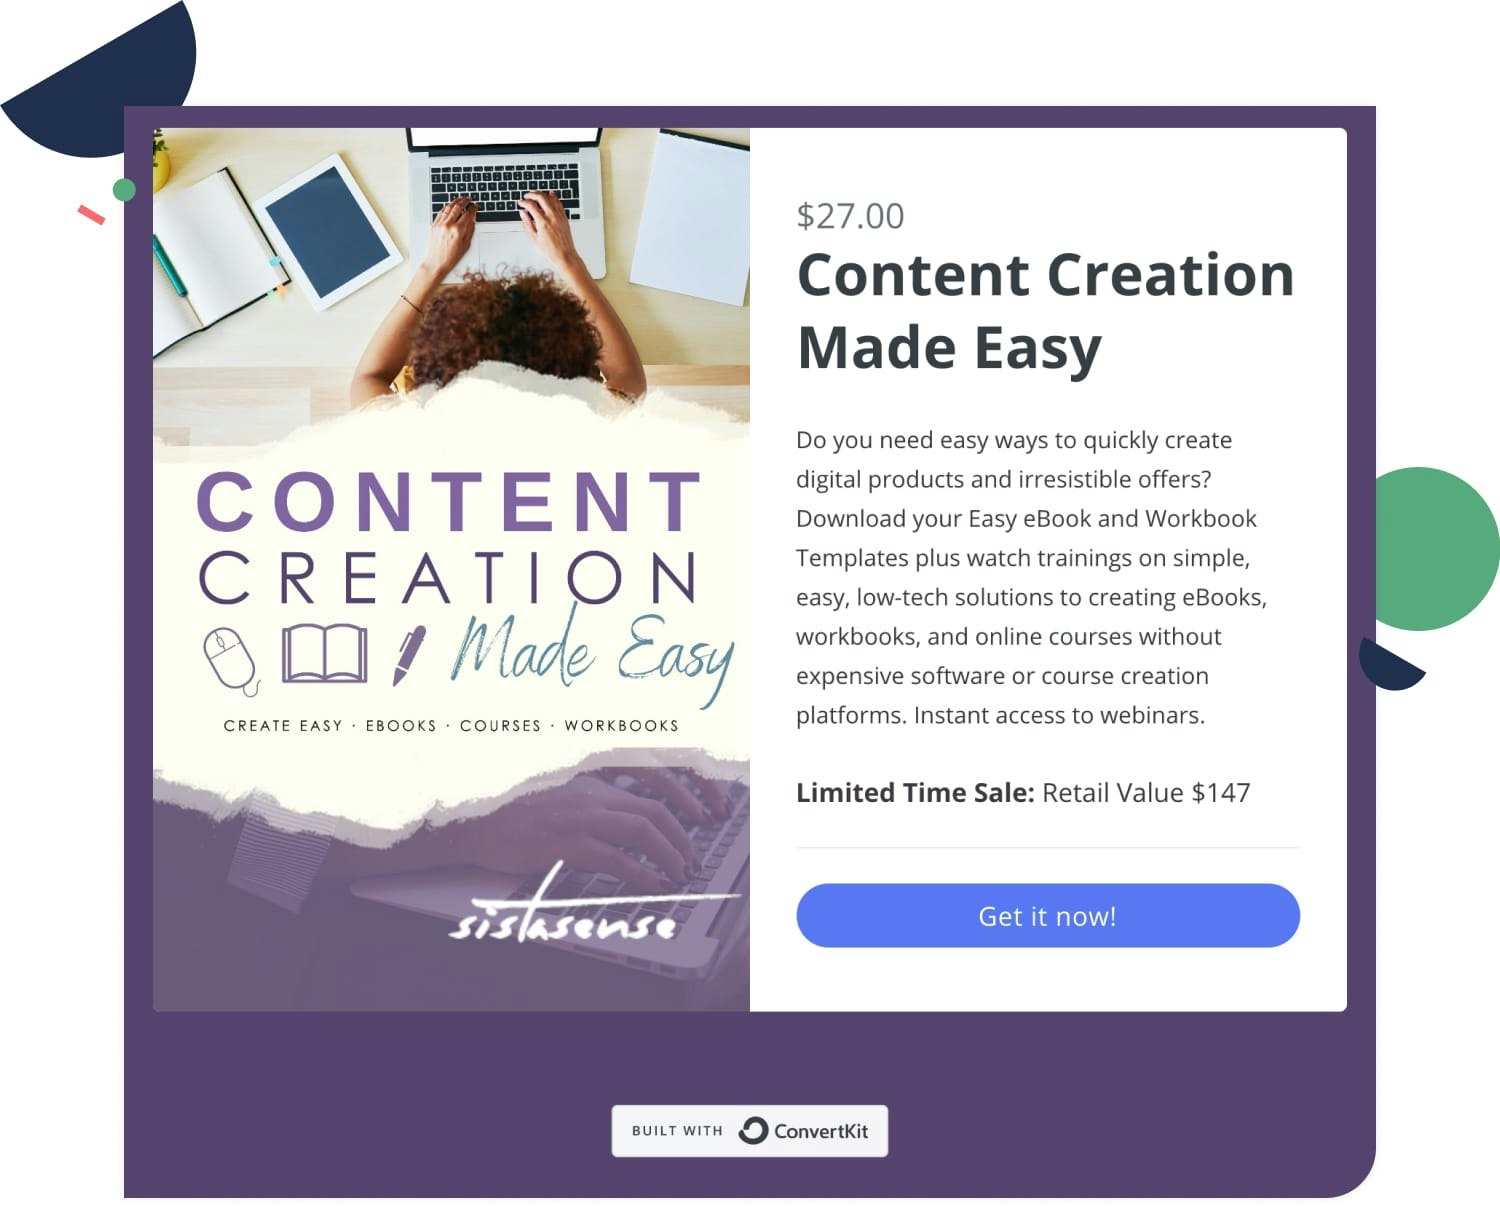 ebook landing page example by SistaSense